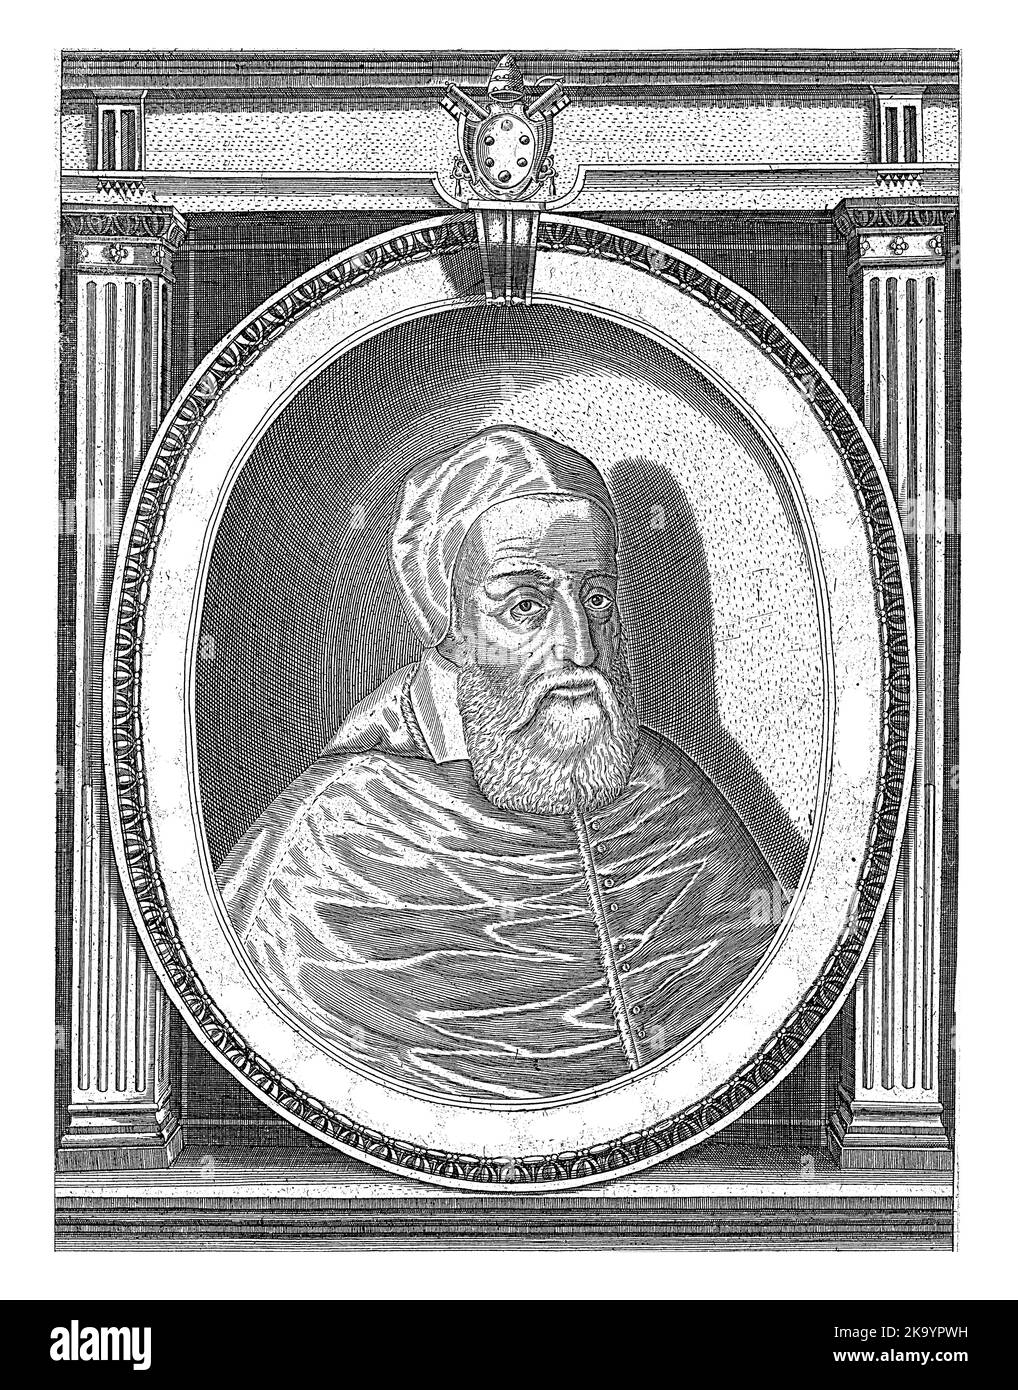 Portrait of Pope Leo XI dressed in the papal robes, head with a camauro. Bust to the right in an oval frame with edge lettering. Stock Photo